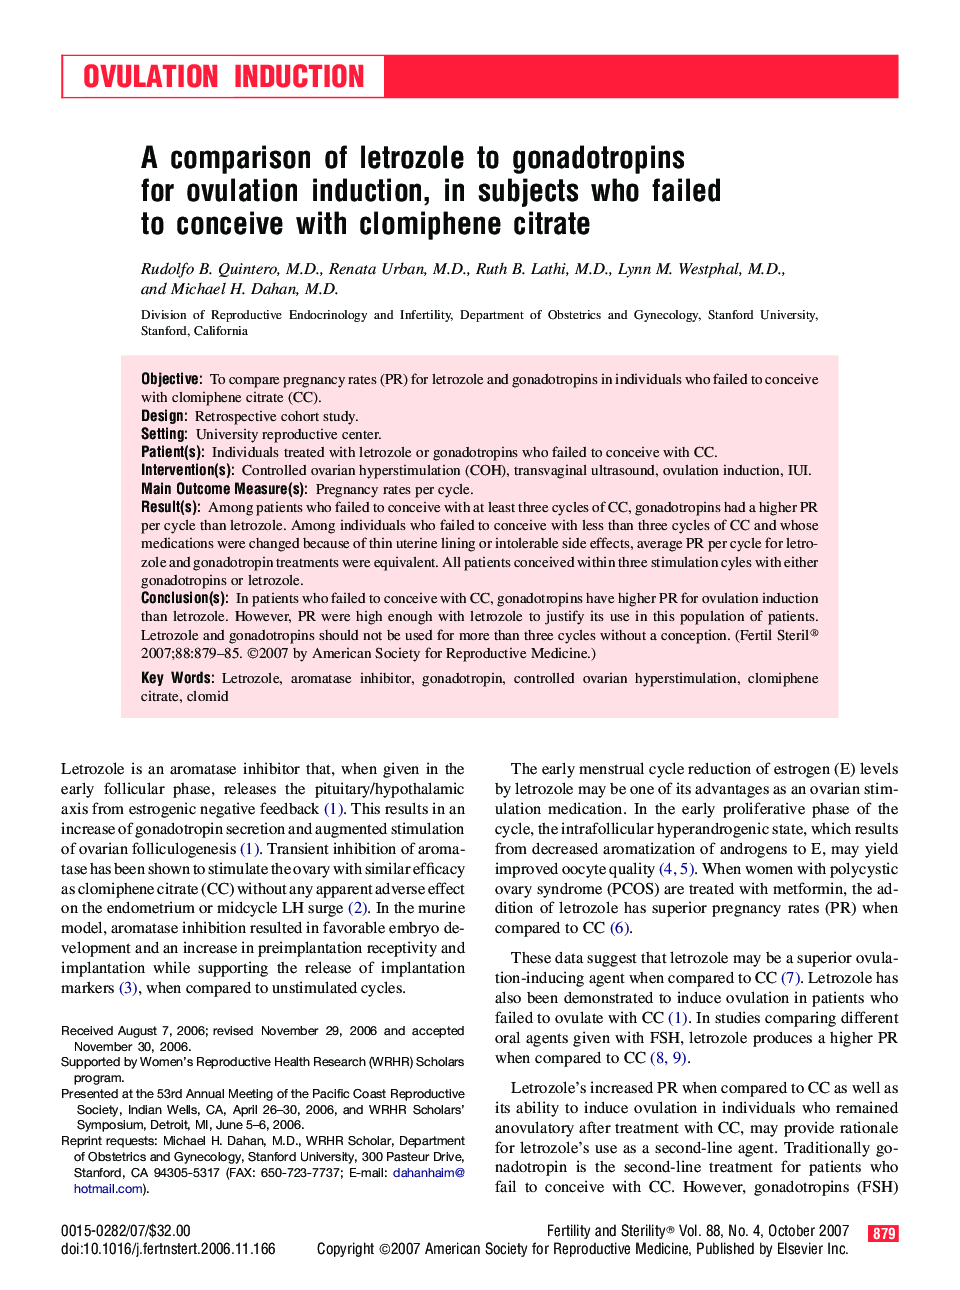 A comparison of letrozole to gonadotropins for ovulation induction, in subjects who failed to conceive with clomiphene citrate 